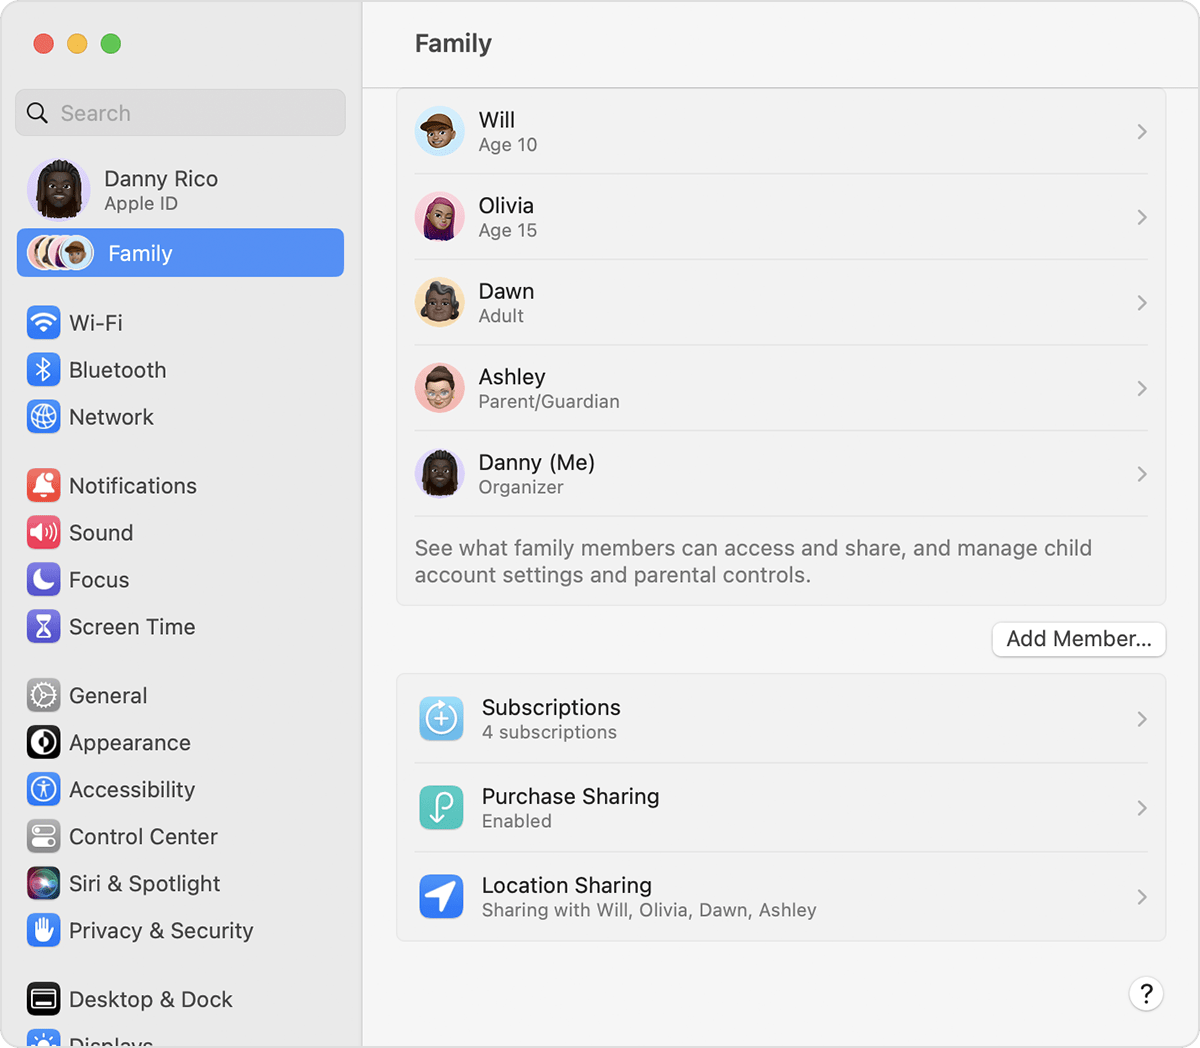 The Add Member button is just below the list of people in your family group.